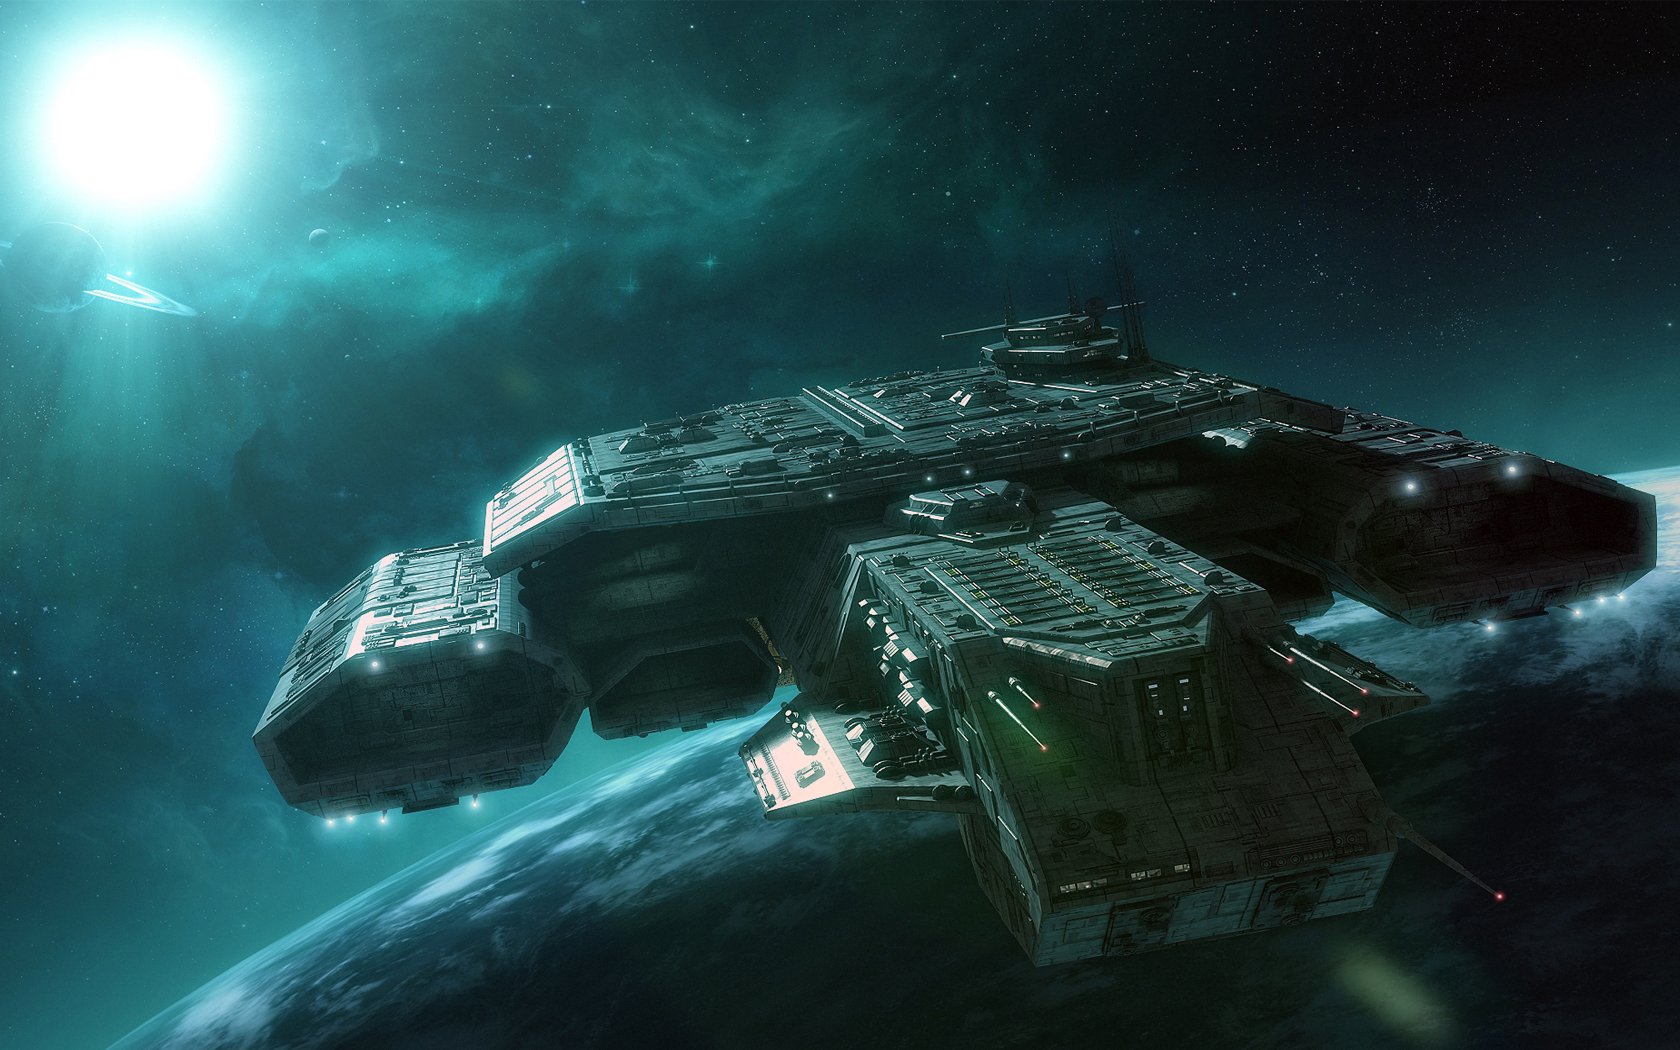  Wallpaper 1680x1050 Stargate Spaceships Science Fiction Vehicles